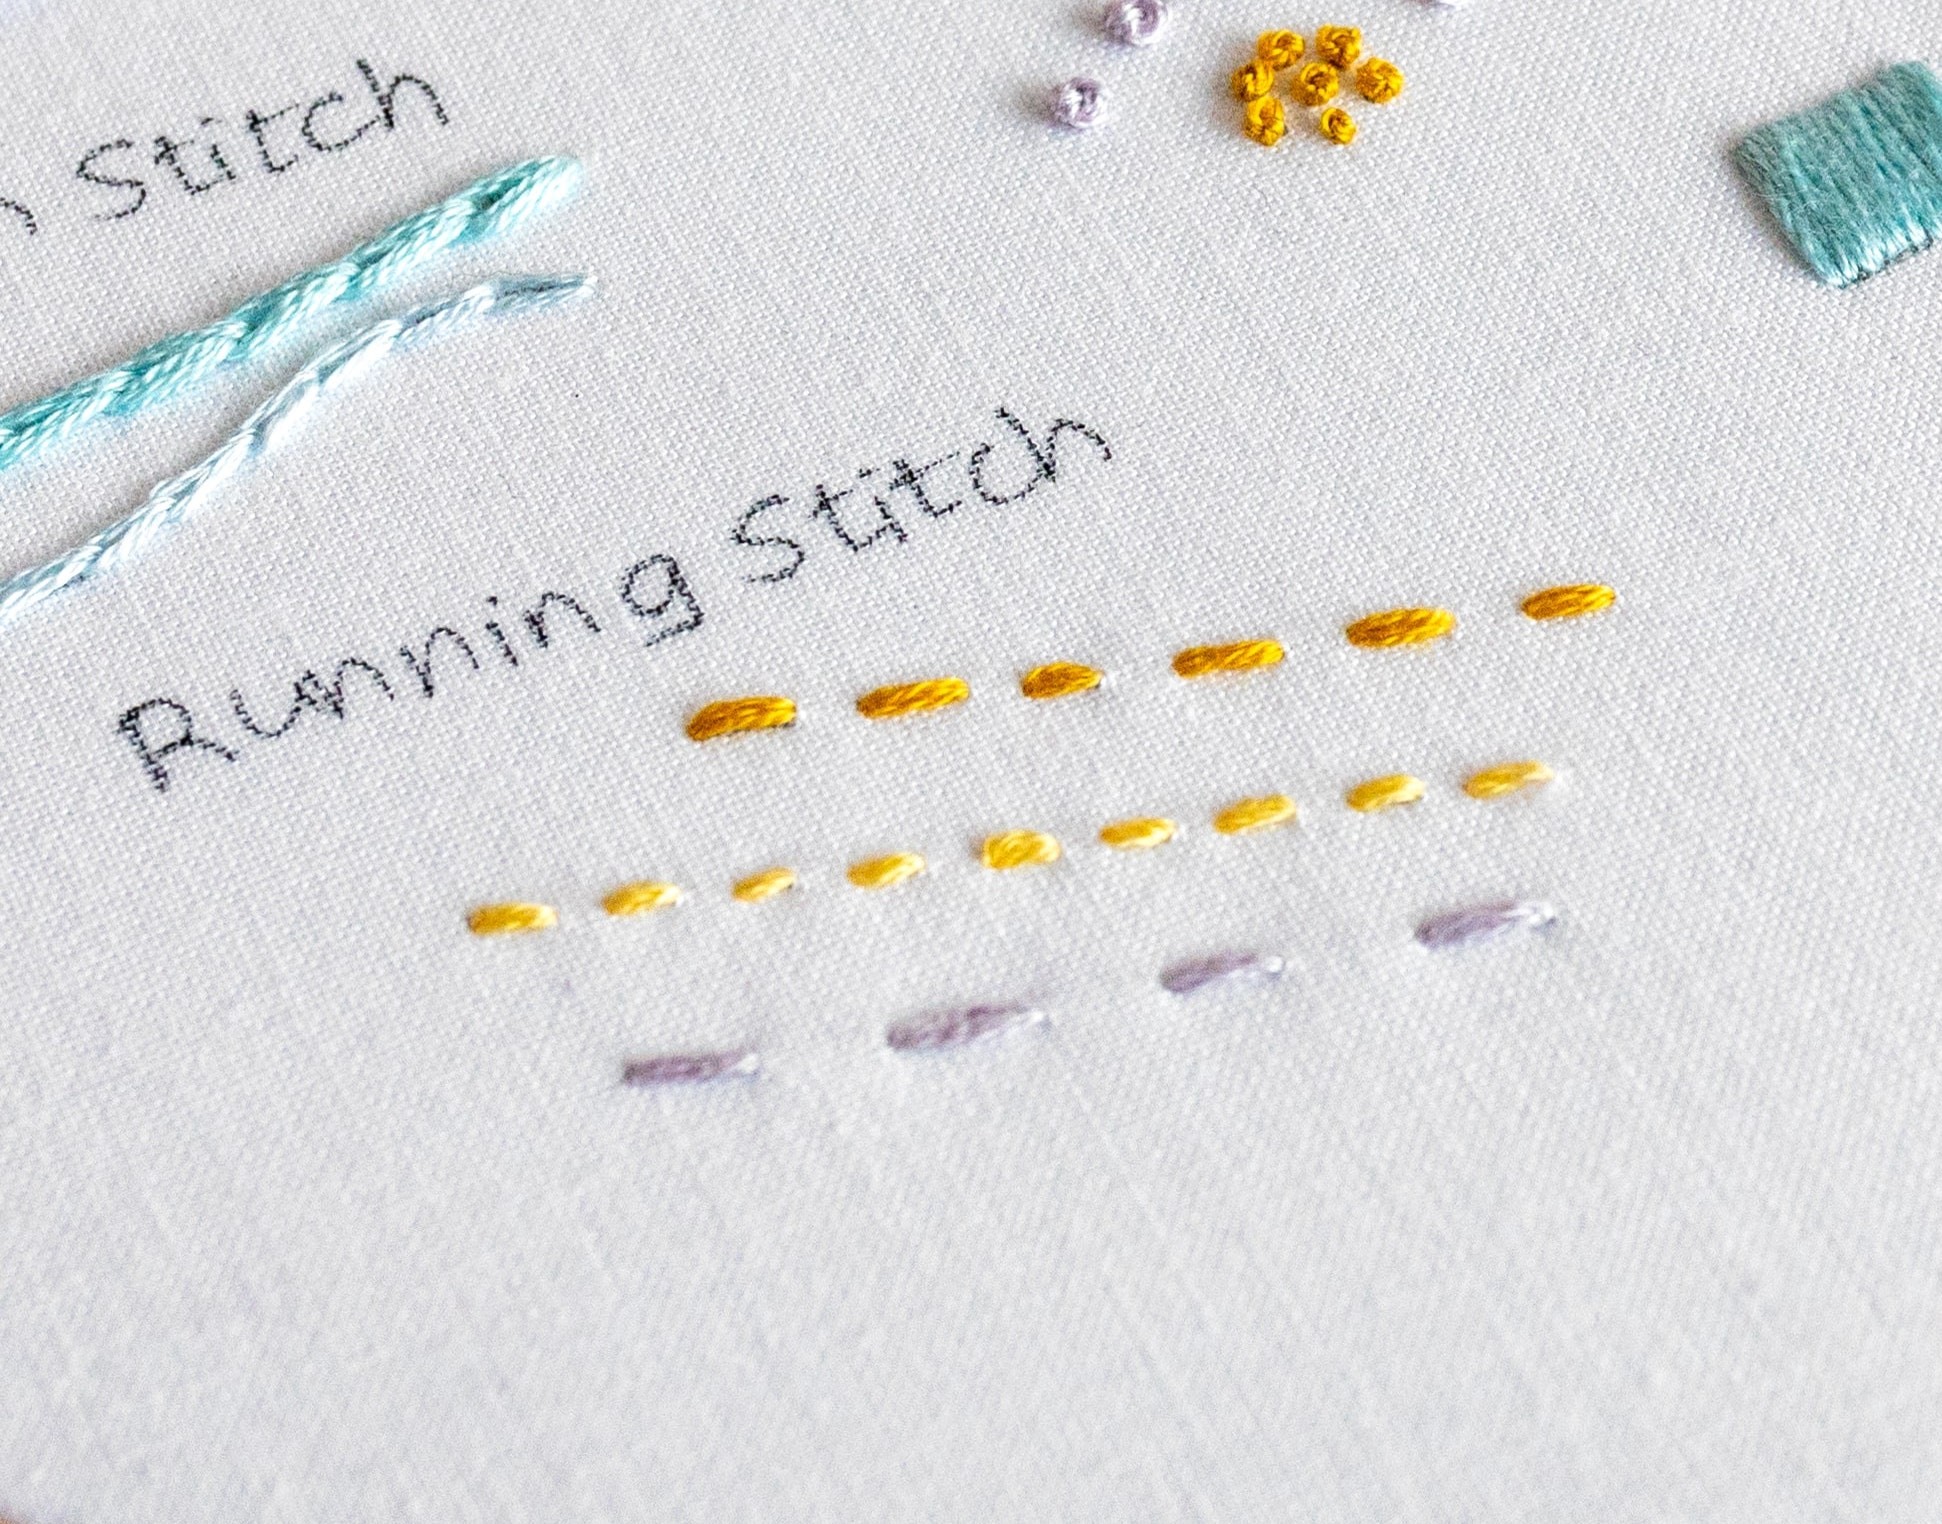 Multiple embroidery stitches are stitched on a fabric background.